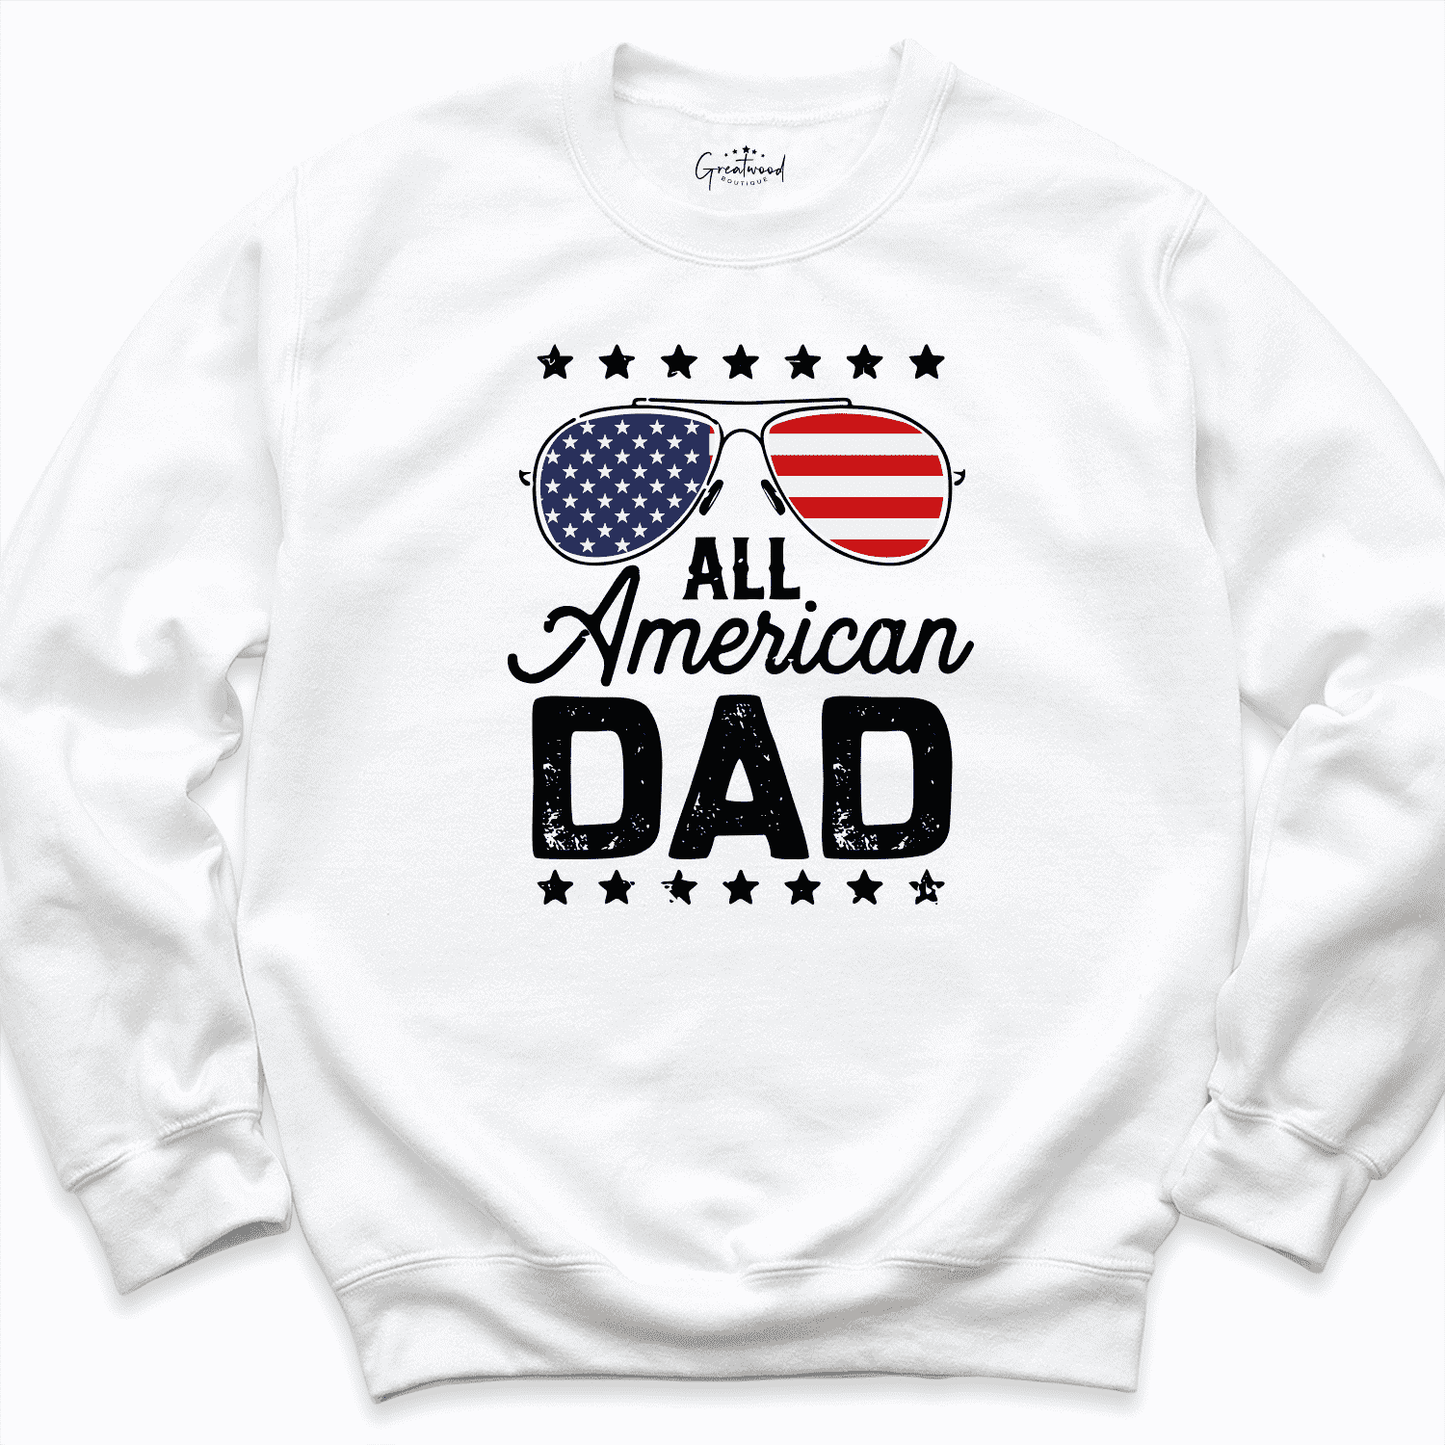 All American Dad Shirt White - Greatwood Boutique